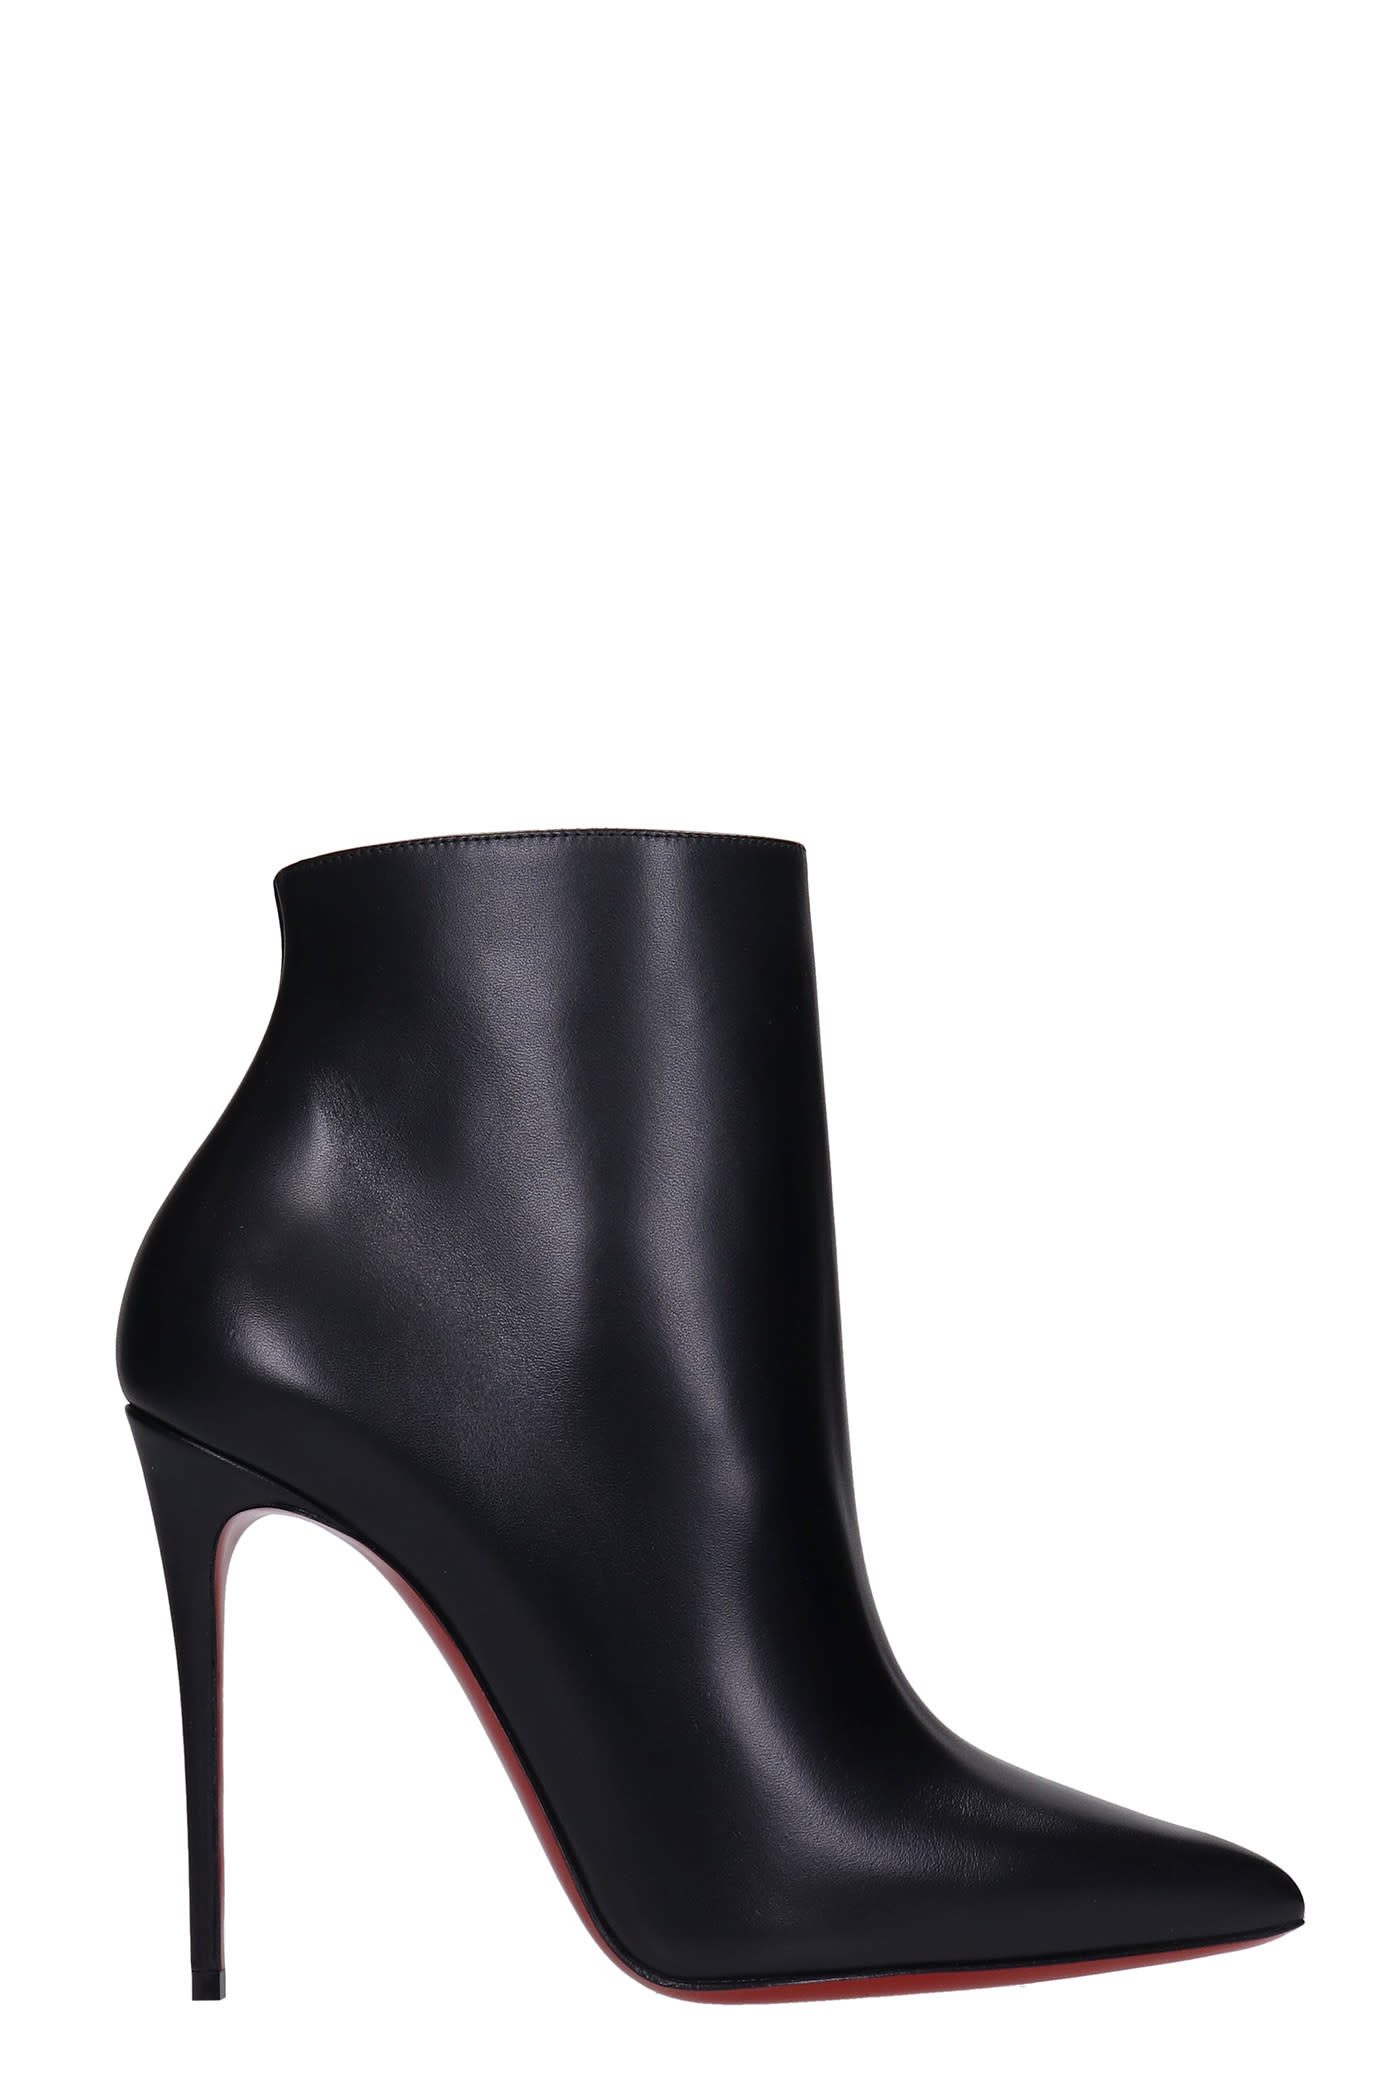 CHRISTIAN LOUBOUTIN SO KATE BOOTY HIGH HEELS ANKLE BOOTS IN BLACK LEATHER,1140505BK01